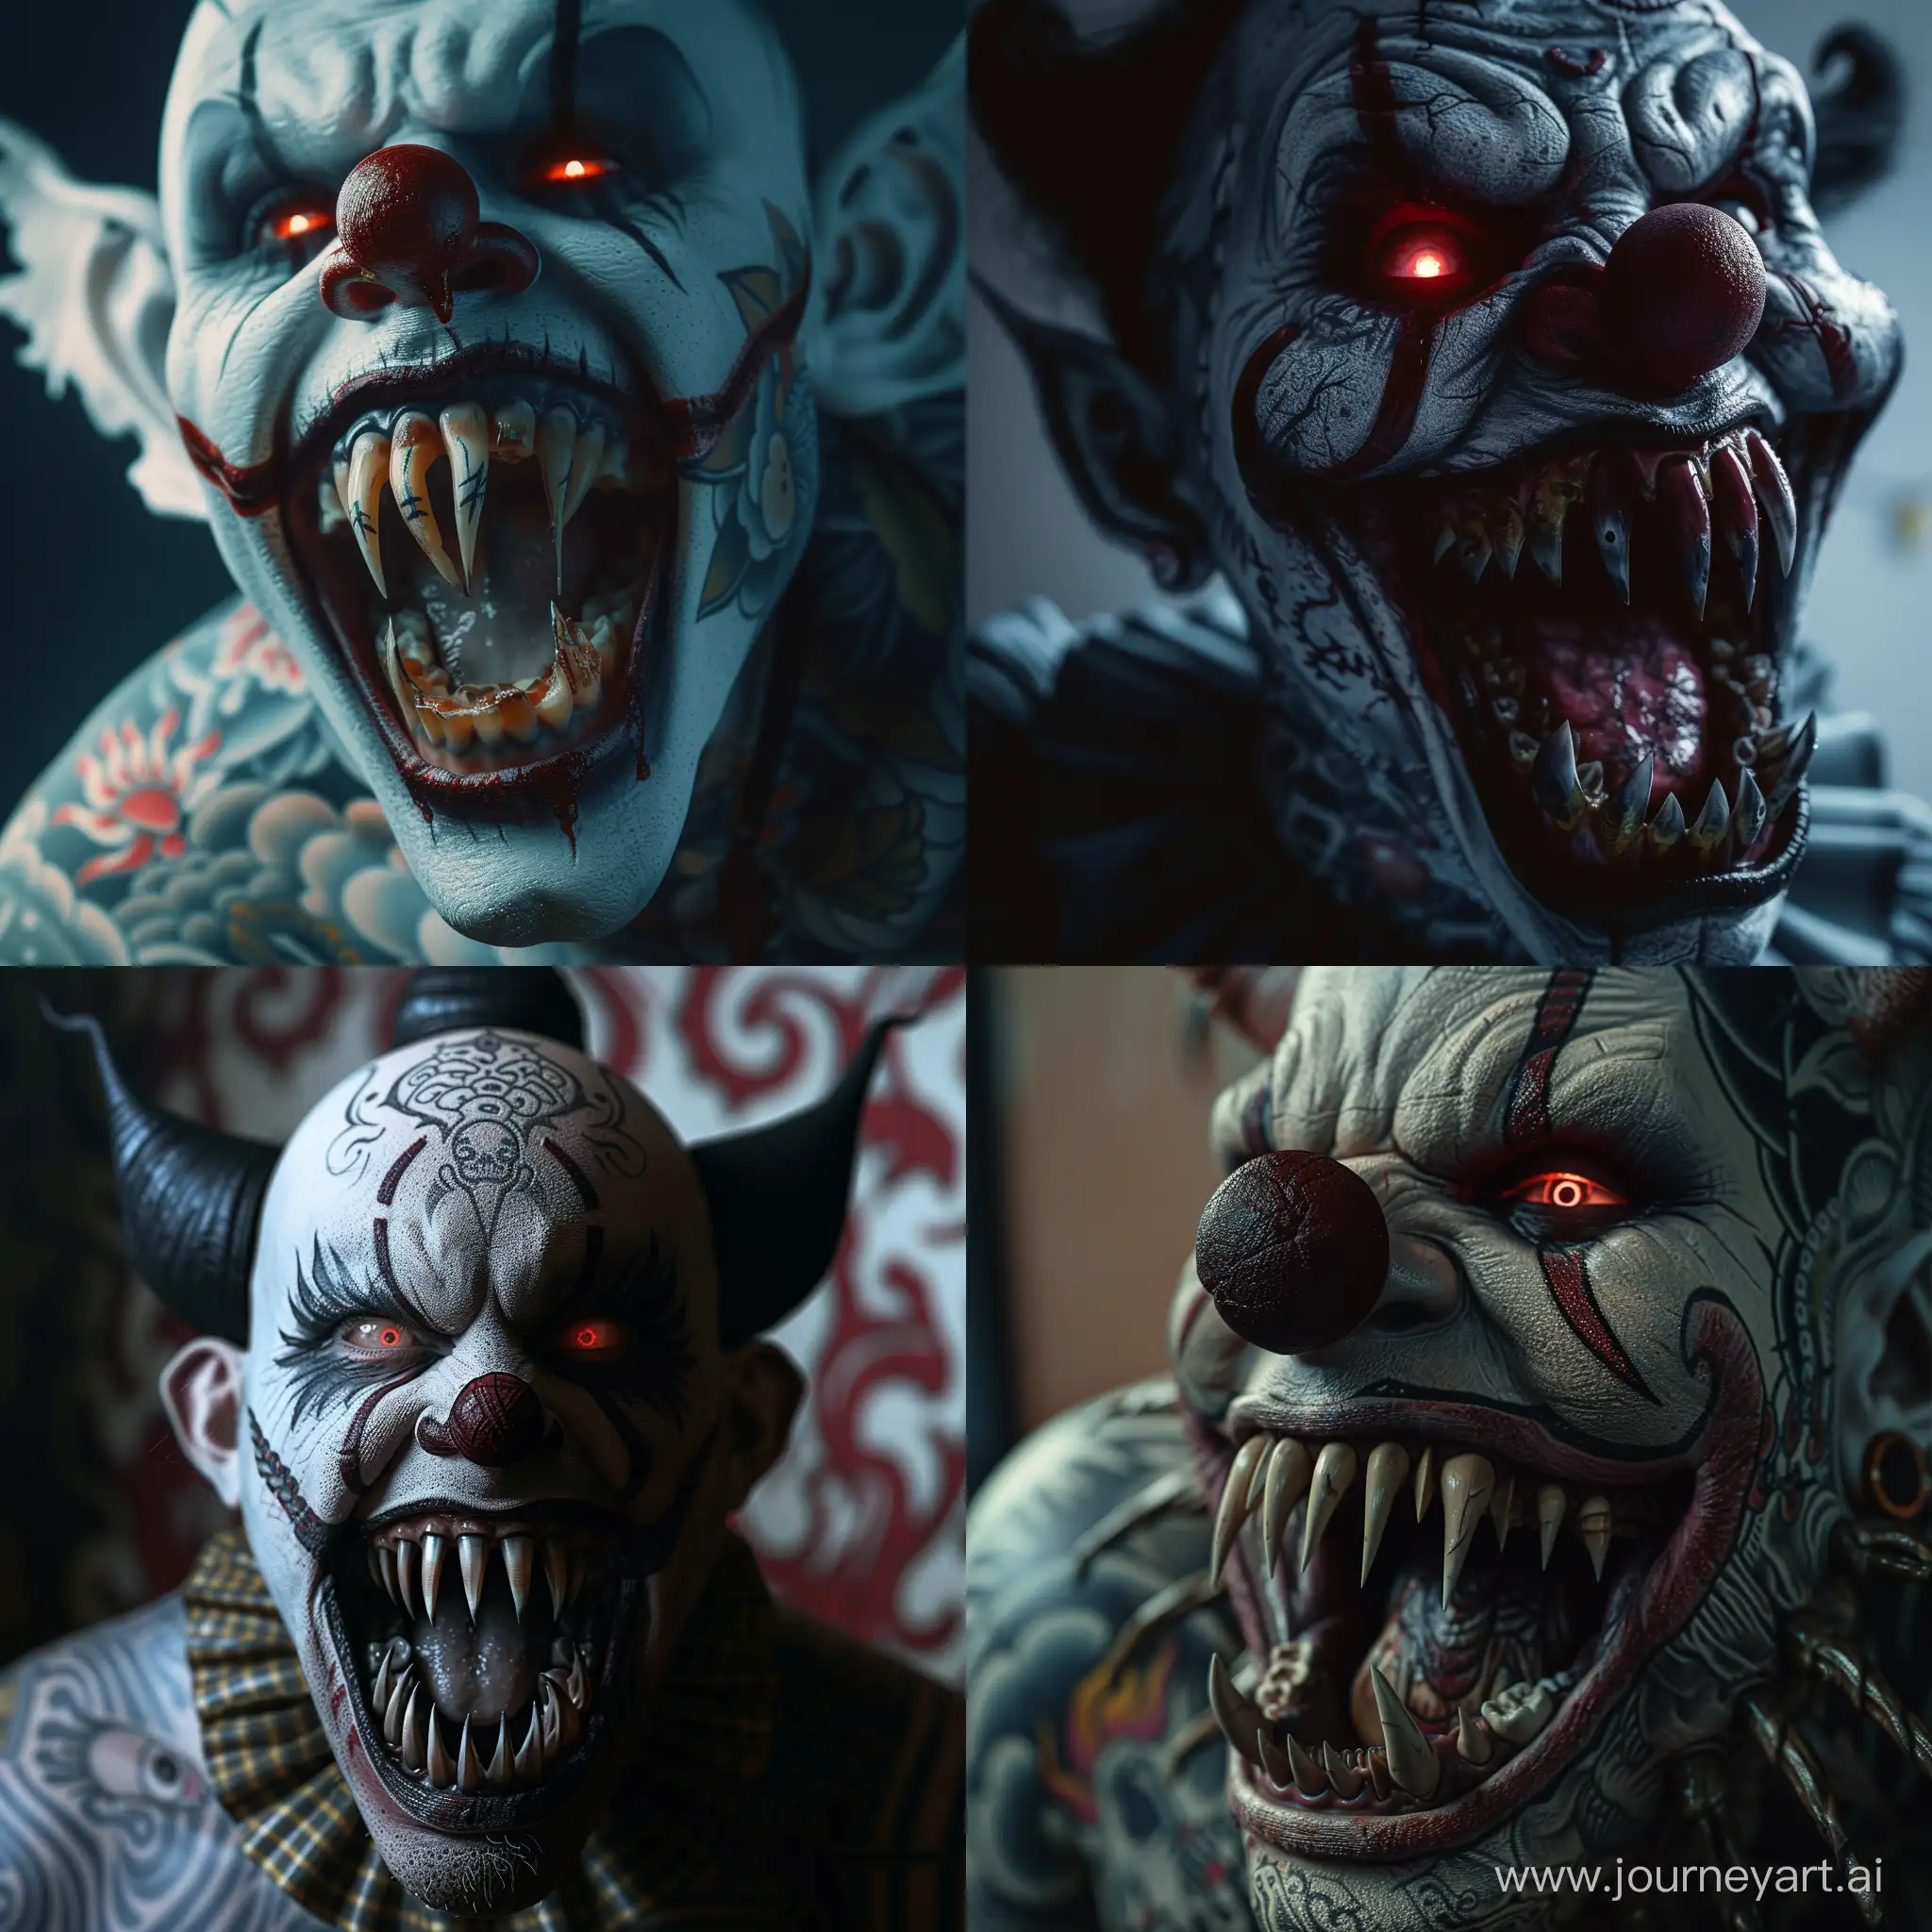 Eerie-Tattooed-Clown-with-Glowing-Eyes-in-Gothic-Setting